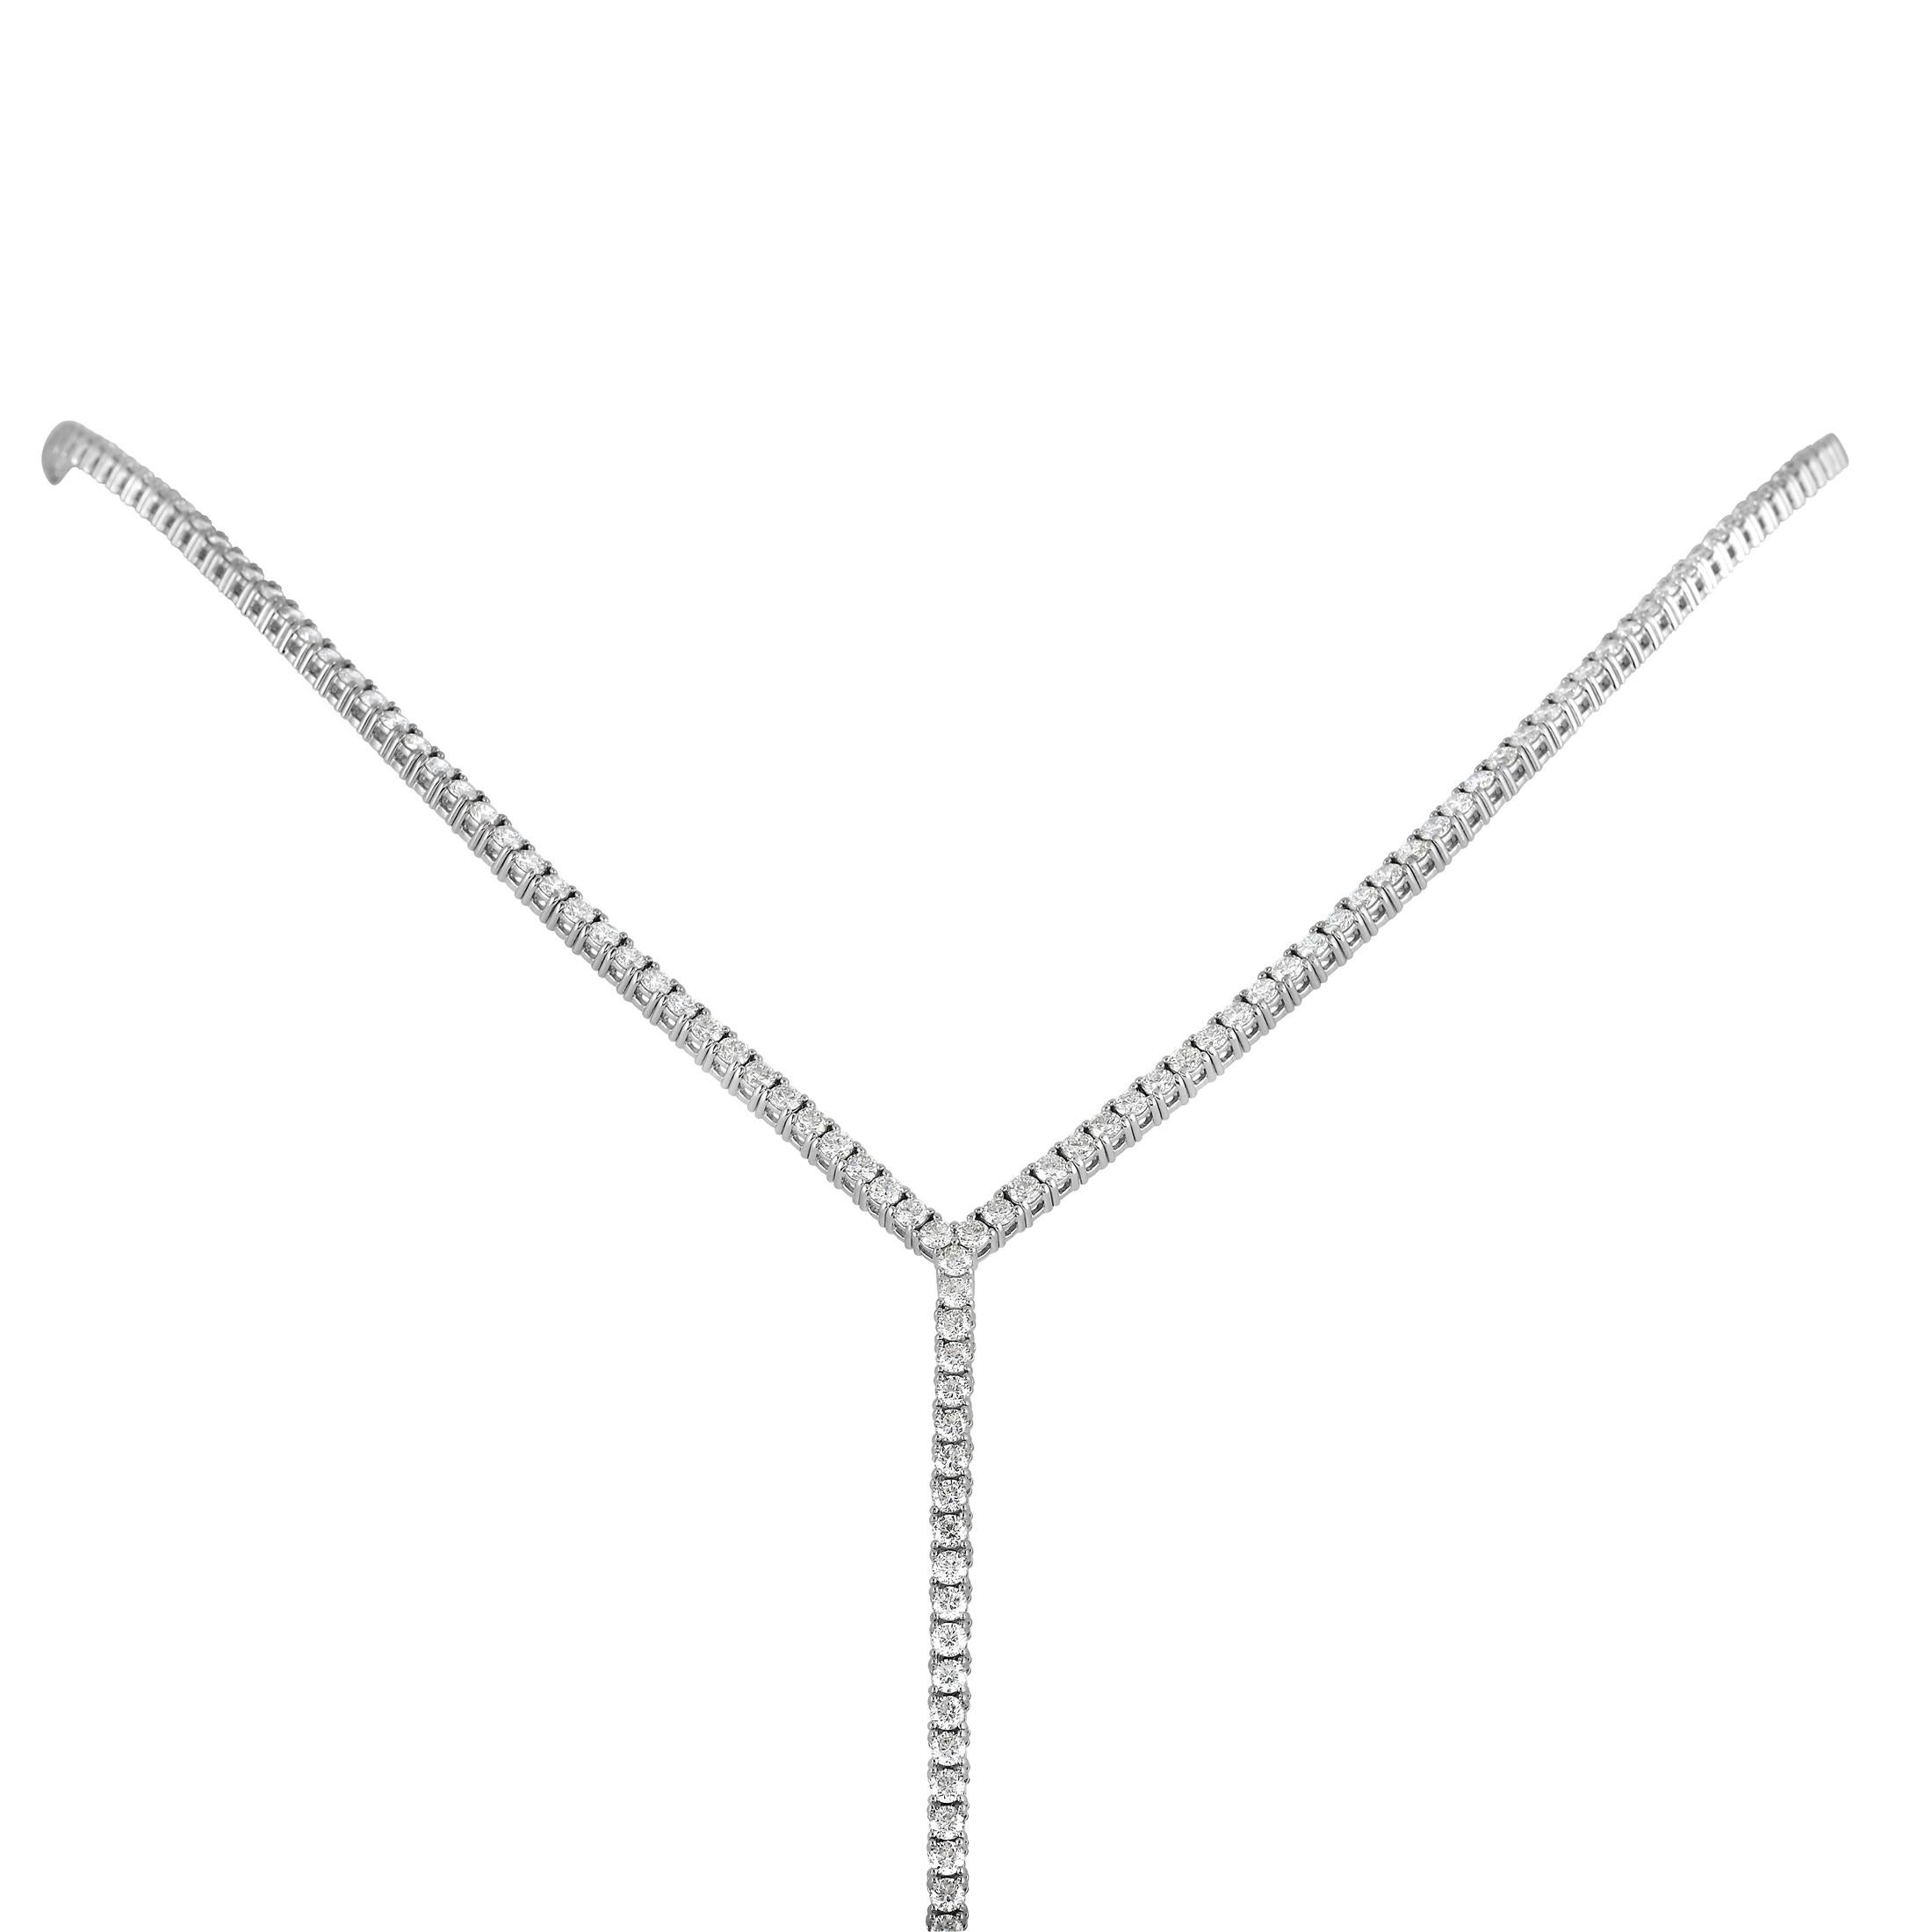 This LB Exclusive 18K White Gold 15.71 ct Diamond Dangle Necklace is an eye-catching piece. The necklace is made with sleek 18K white gold and set with a 15.71-carat row of small round cut diamonds over its length. Each diamond is held in place by